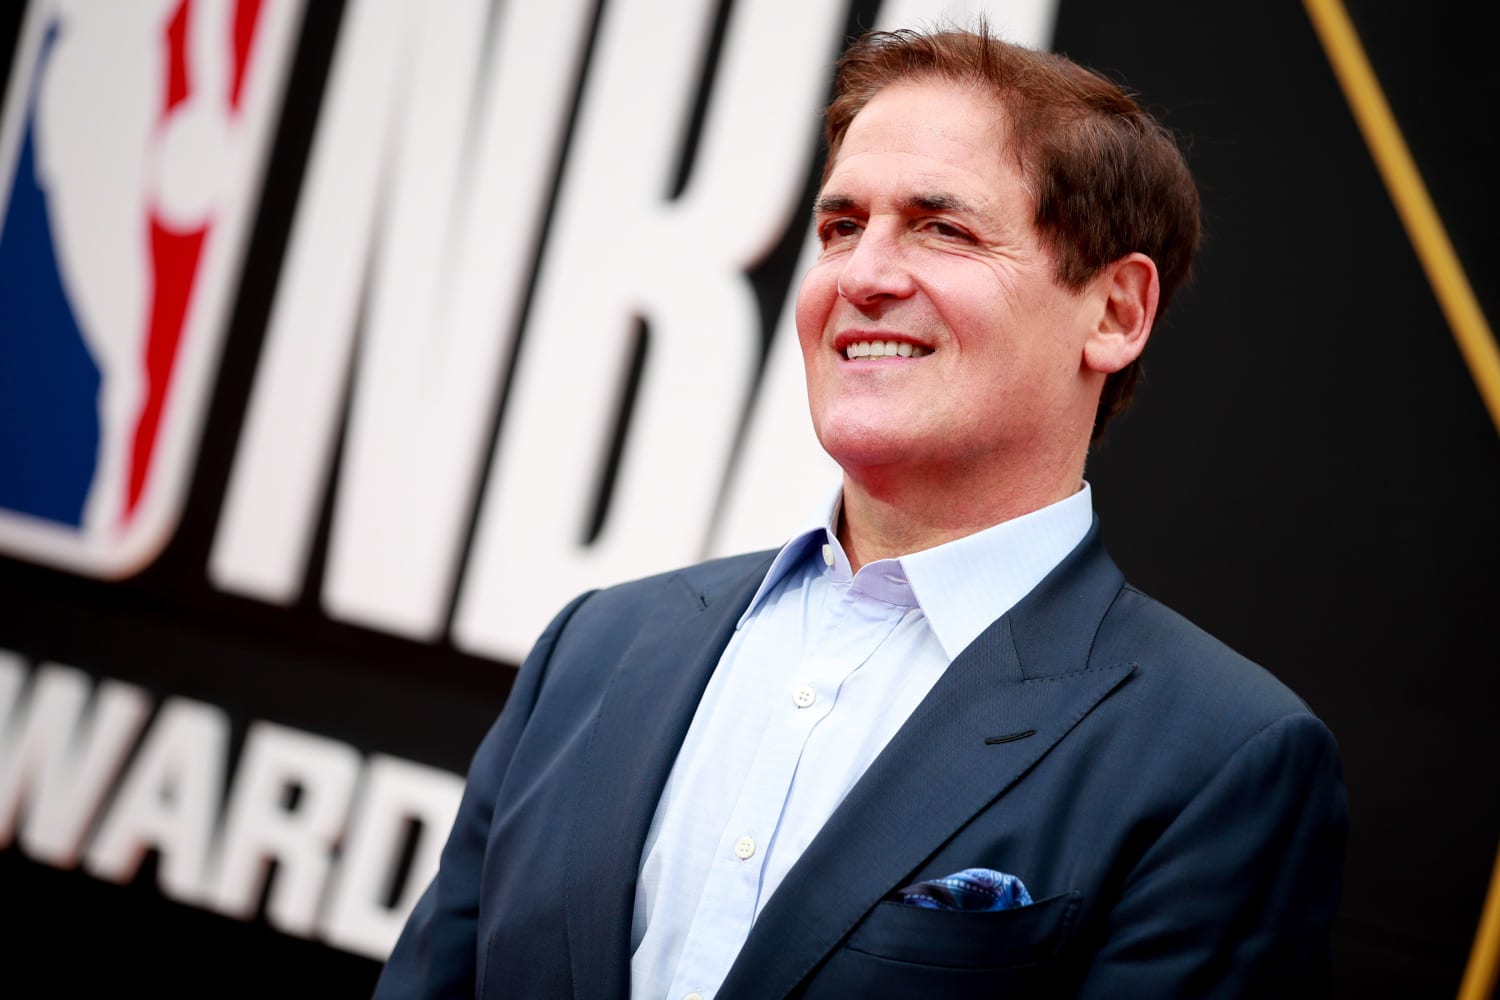 Mark Cuban: If I had to start a side hustle now to make extra money, this is what I'd do